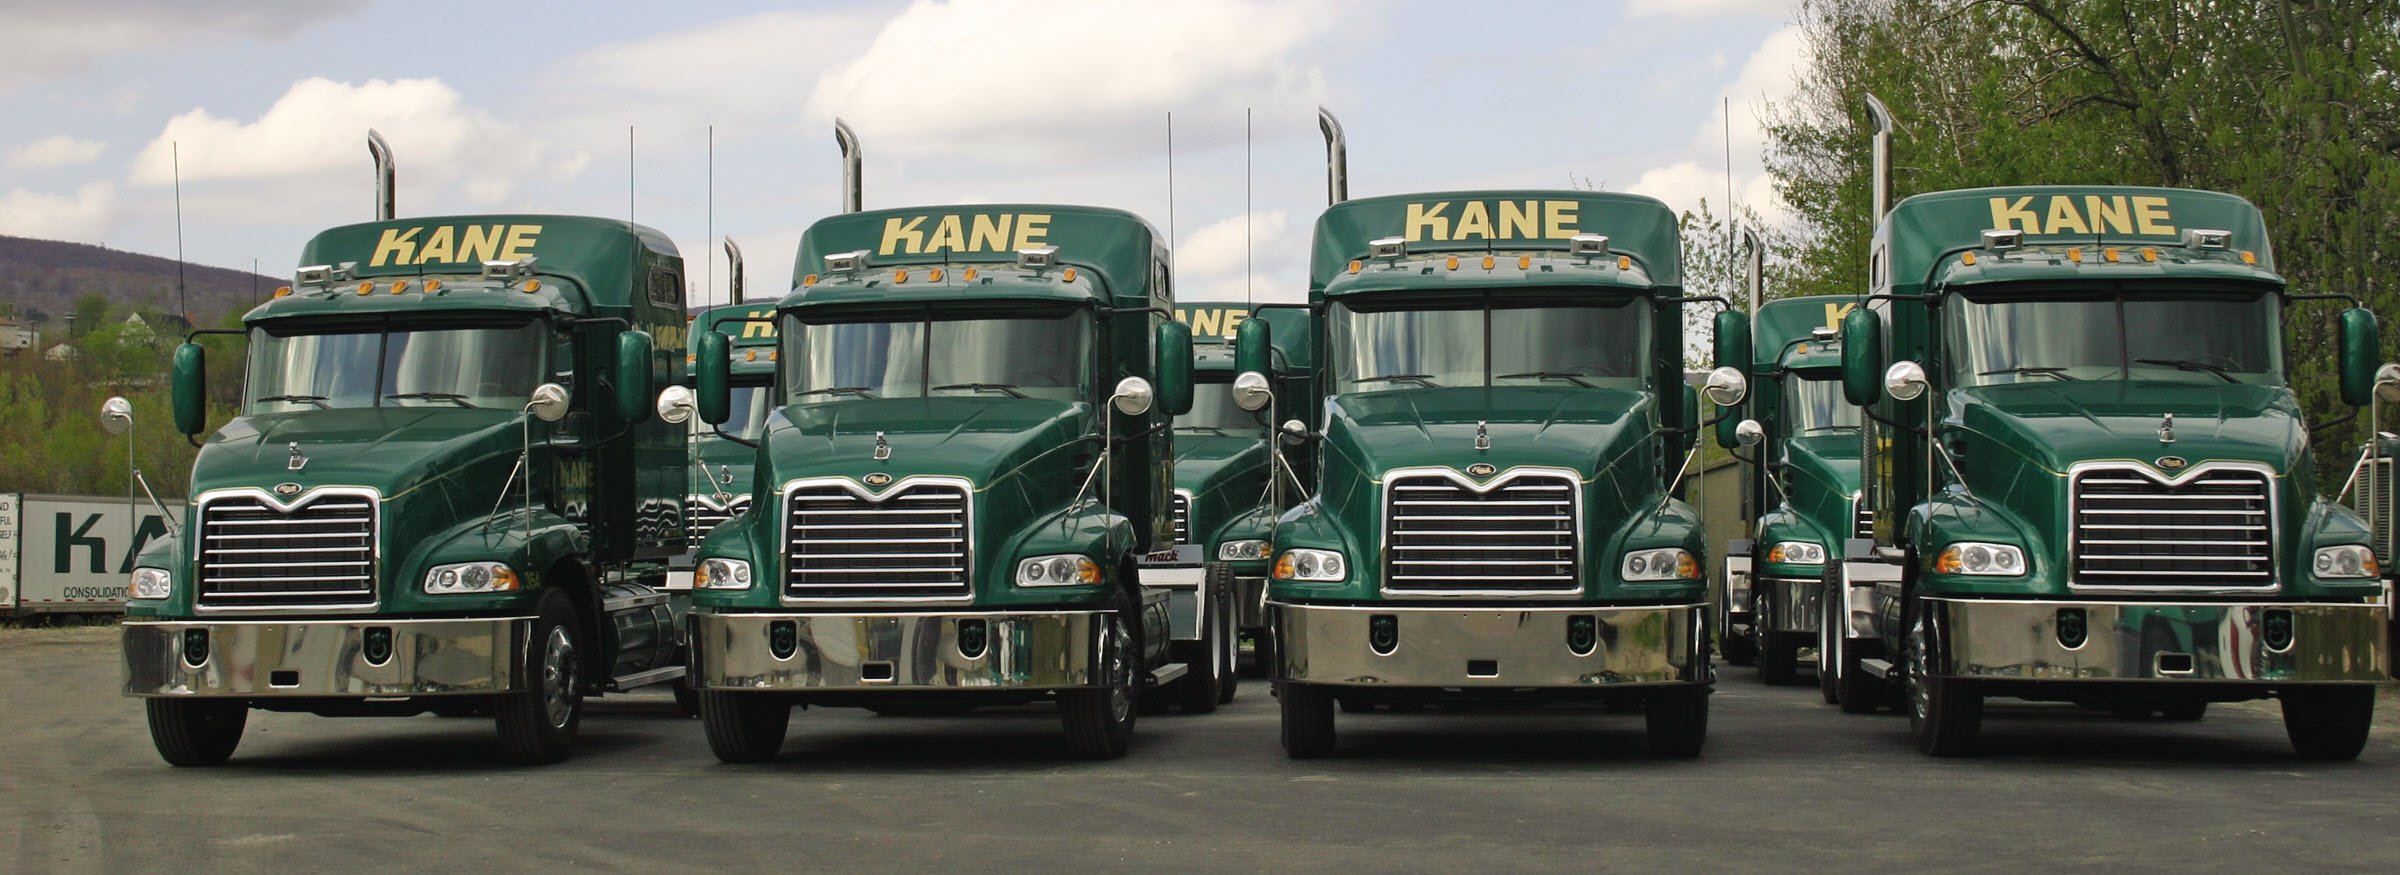 #55-Trucks-inline-frontview-cropped